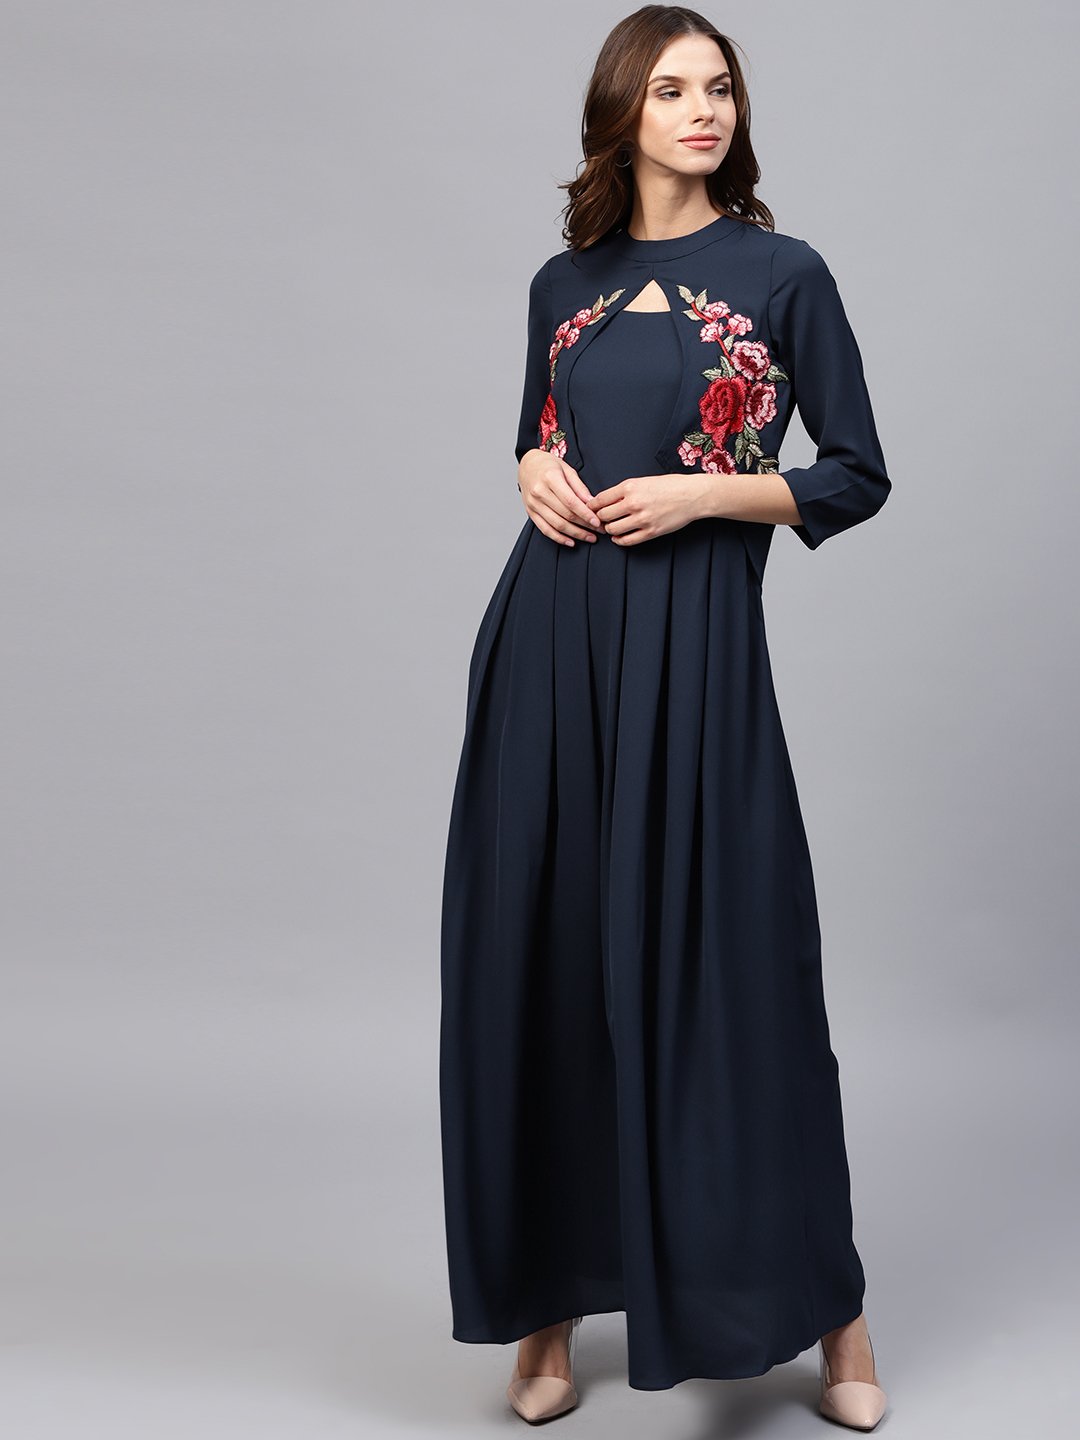 10 Maxi Dresses For You To Beat The Heat In This Summer - ScoopWhoop